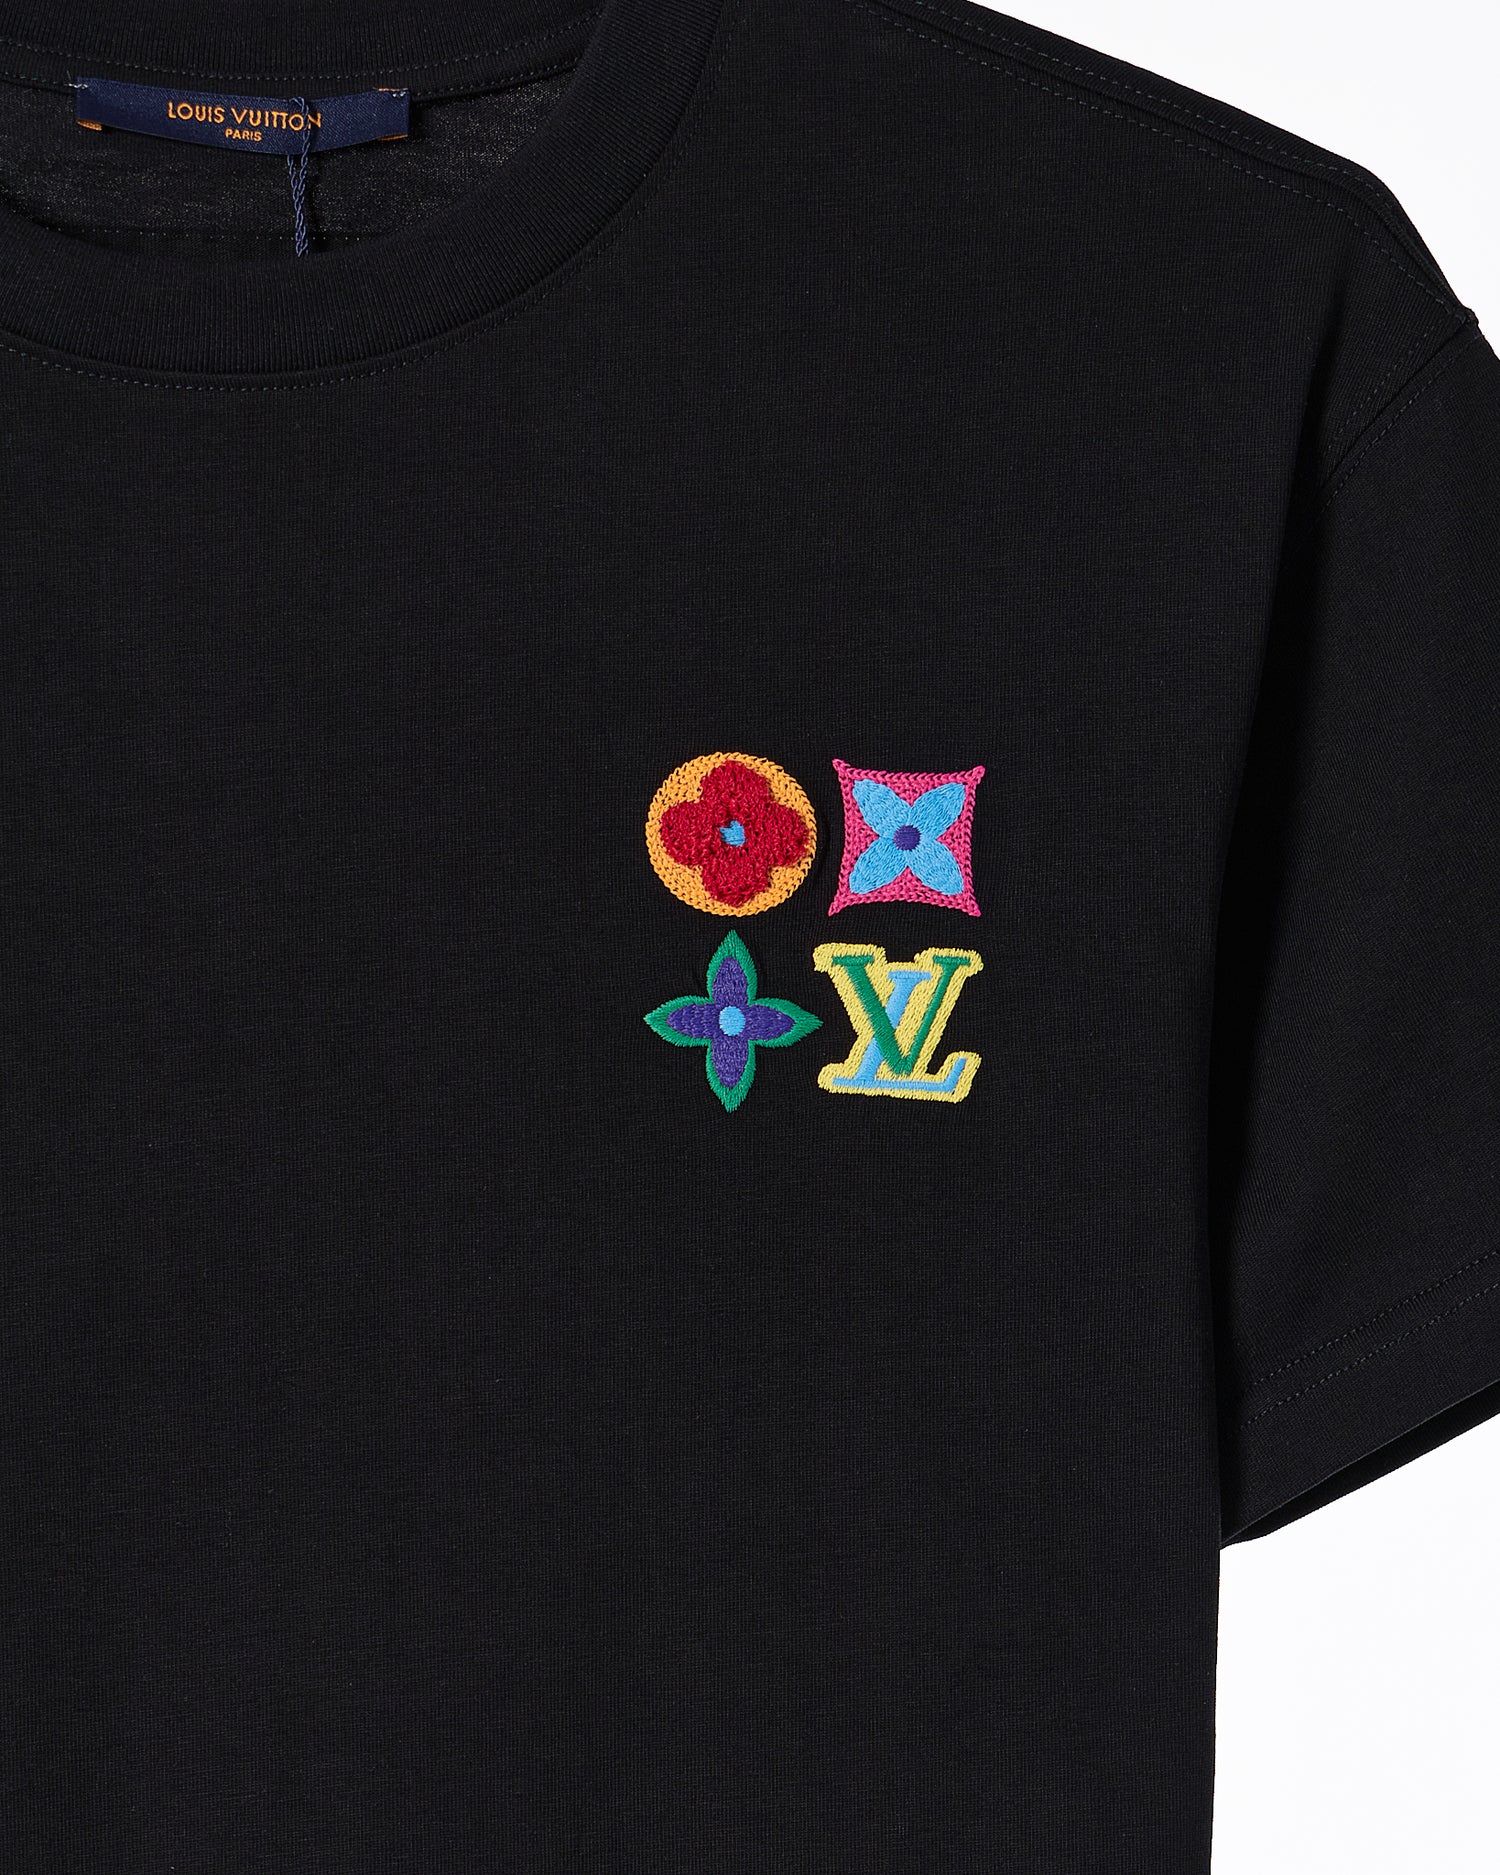 LV Chest Embroidered Men T-Shirt 52.90